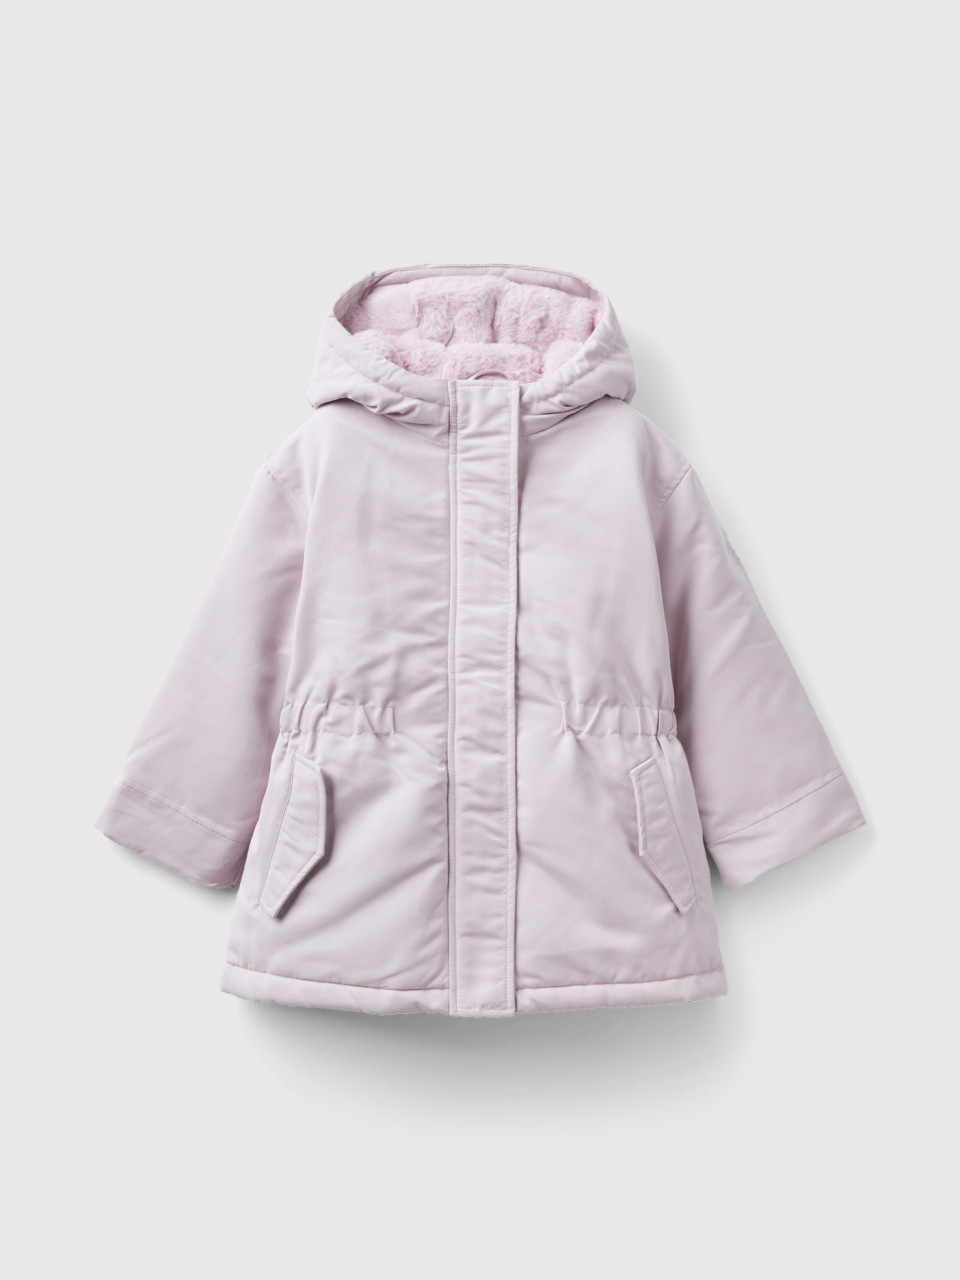 Benetton, Padded Parka With Drawstring, Pink, Kids